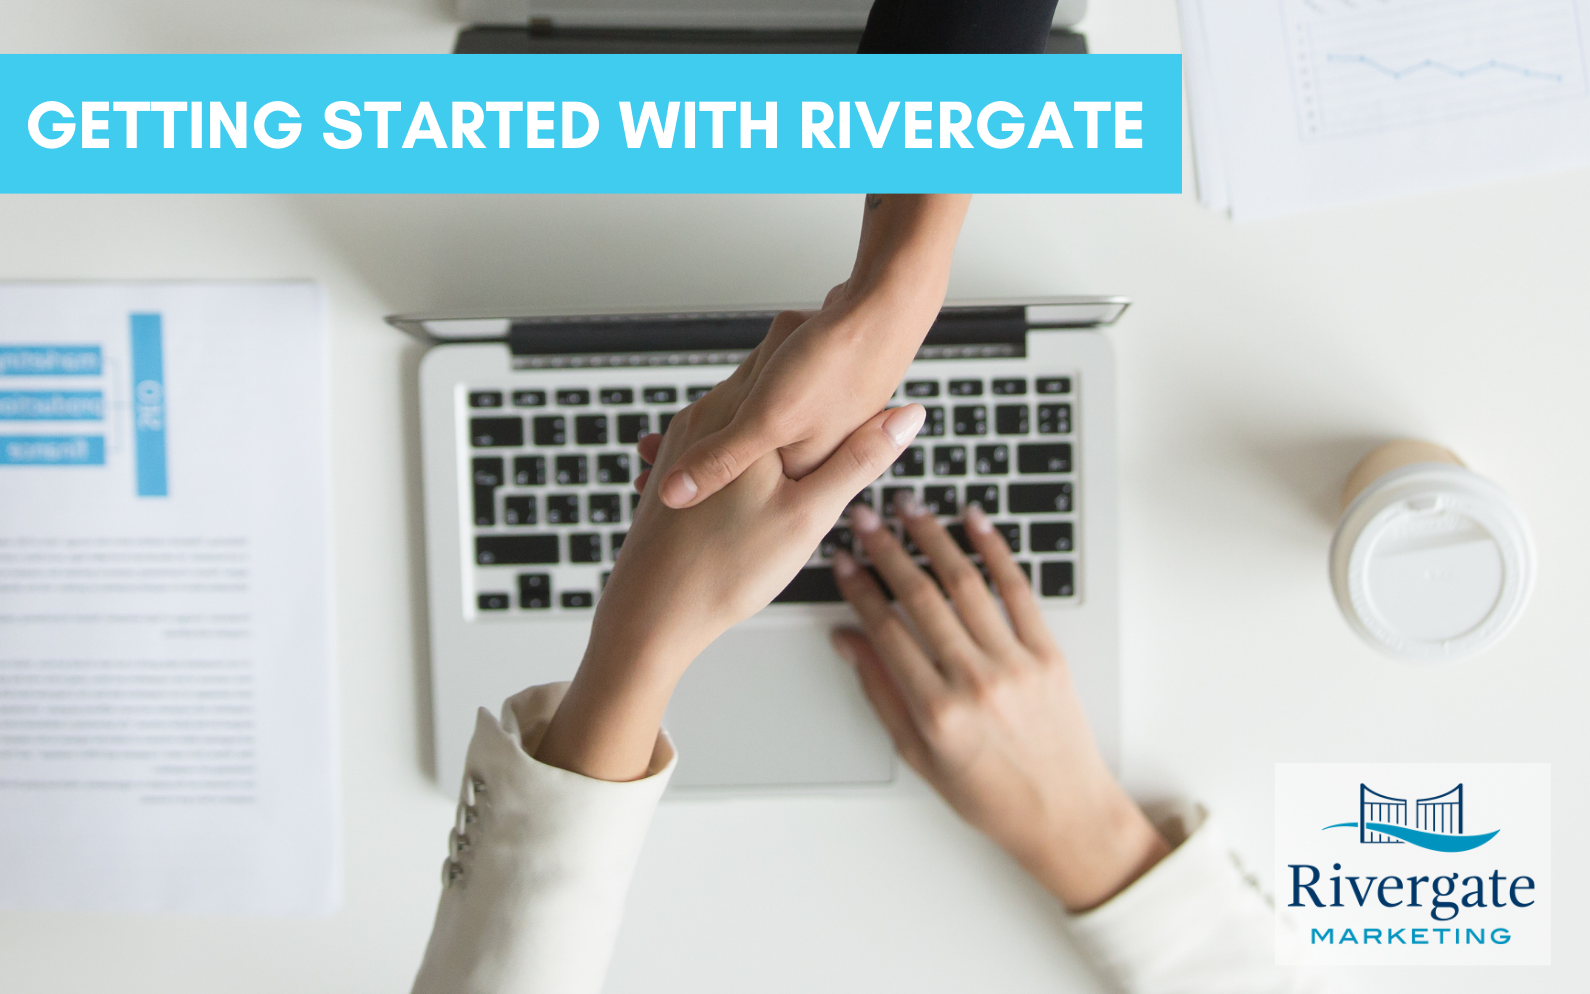 Onboarding with Rivergate Marketing getting started